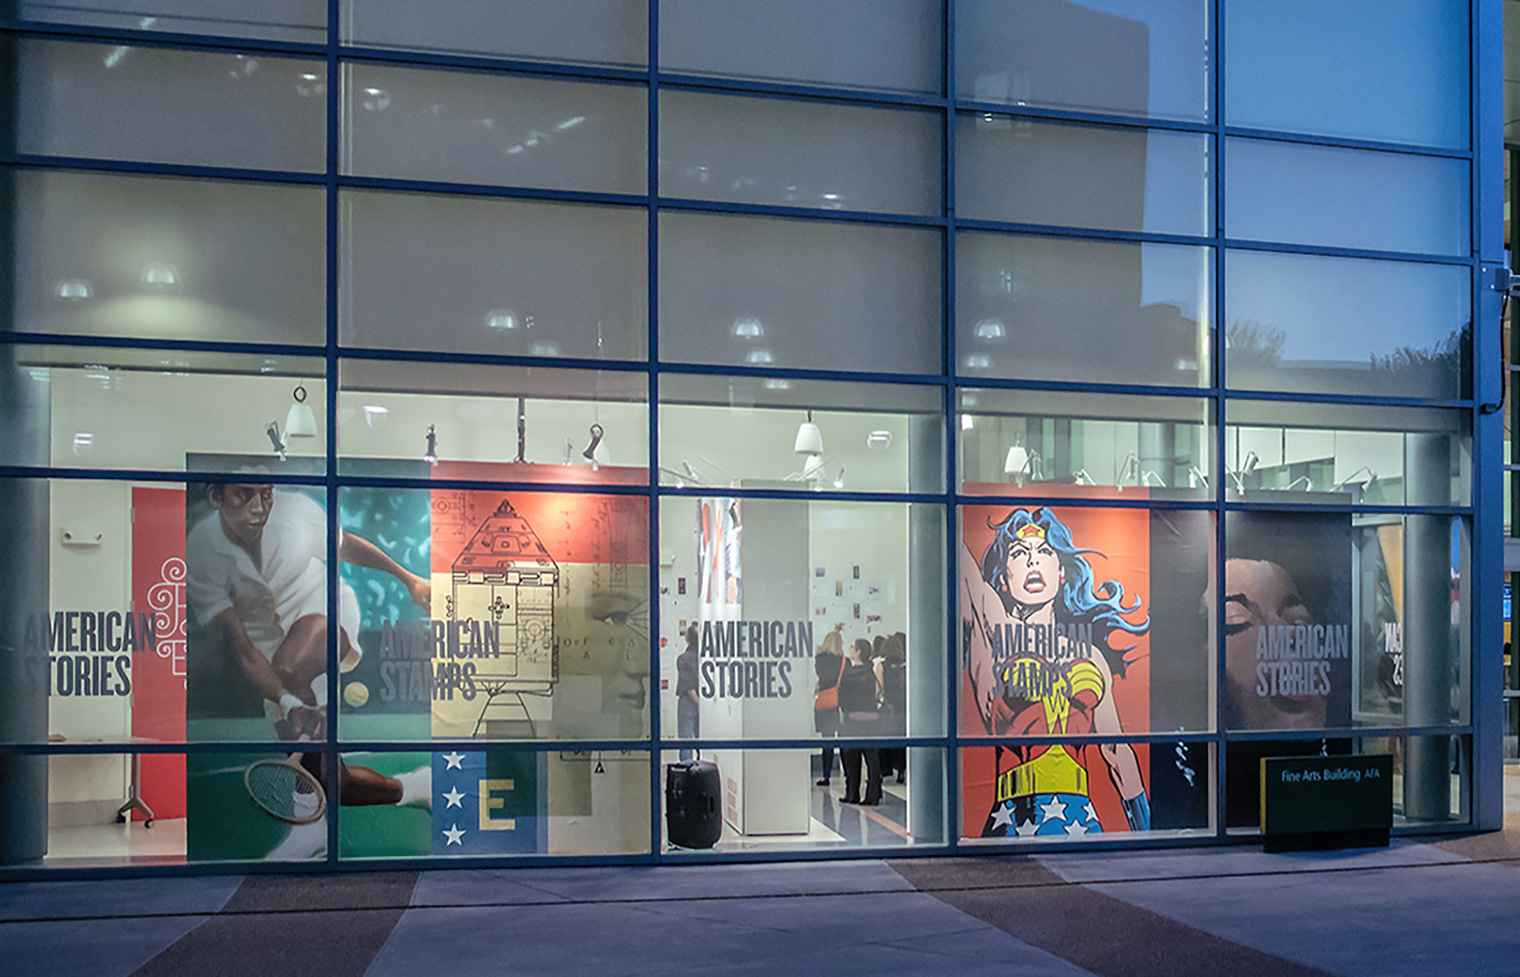 A night view of three walls feature Arthur Ashe, STEM, and Wonder Woman with vinyl title treatments applied to the windows.